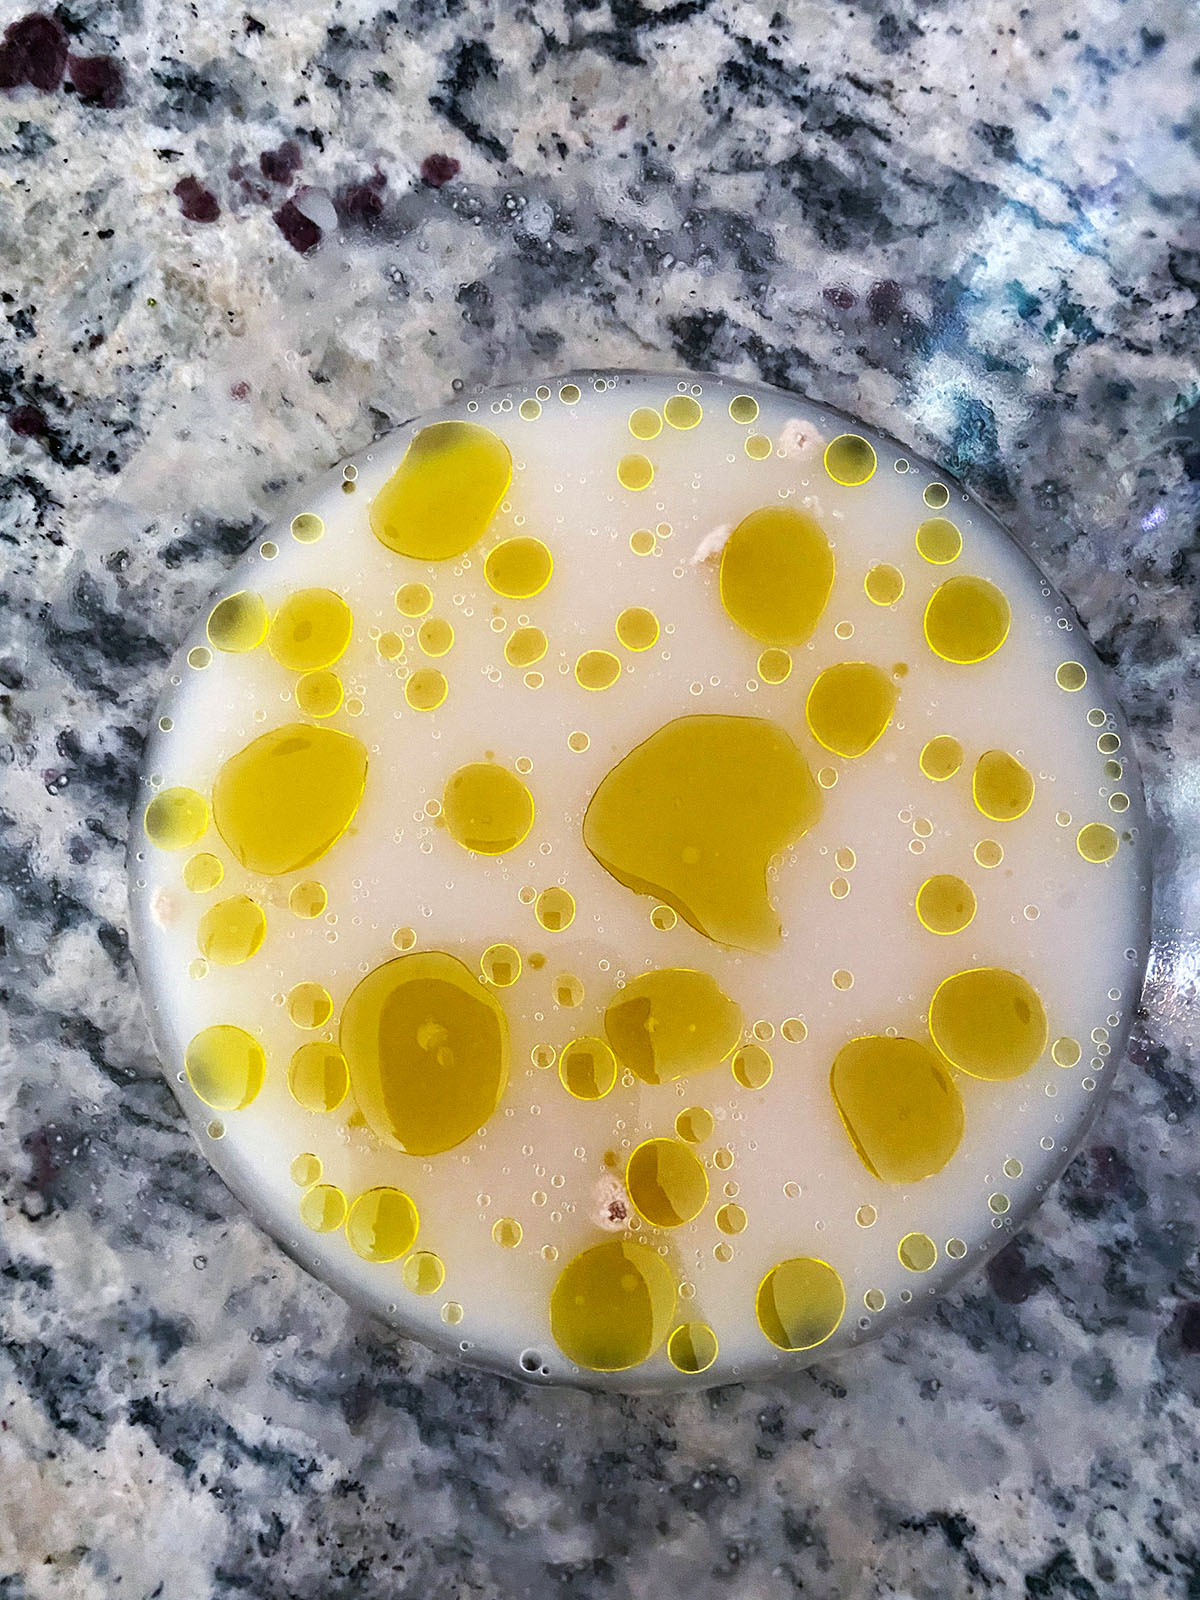 Yeast, oil, and water in bowl.